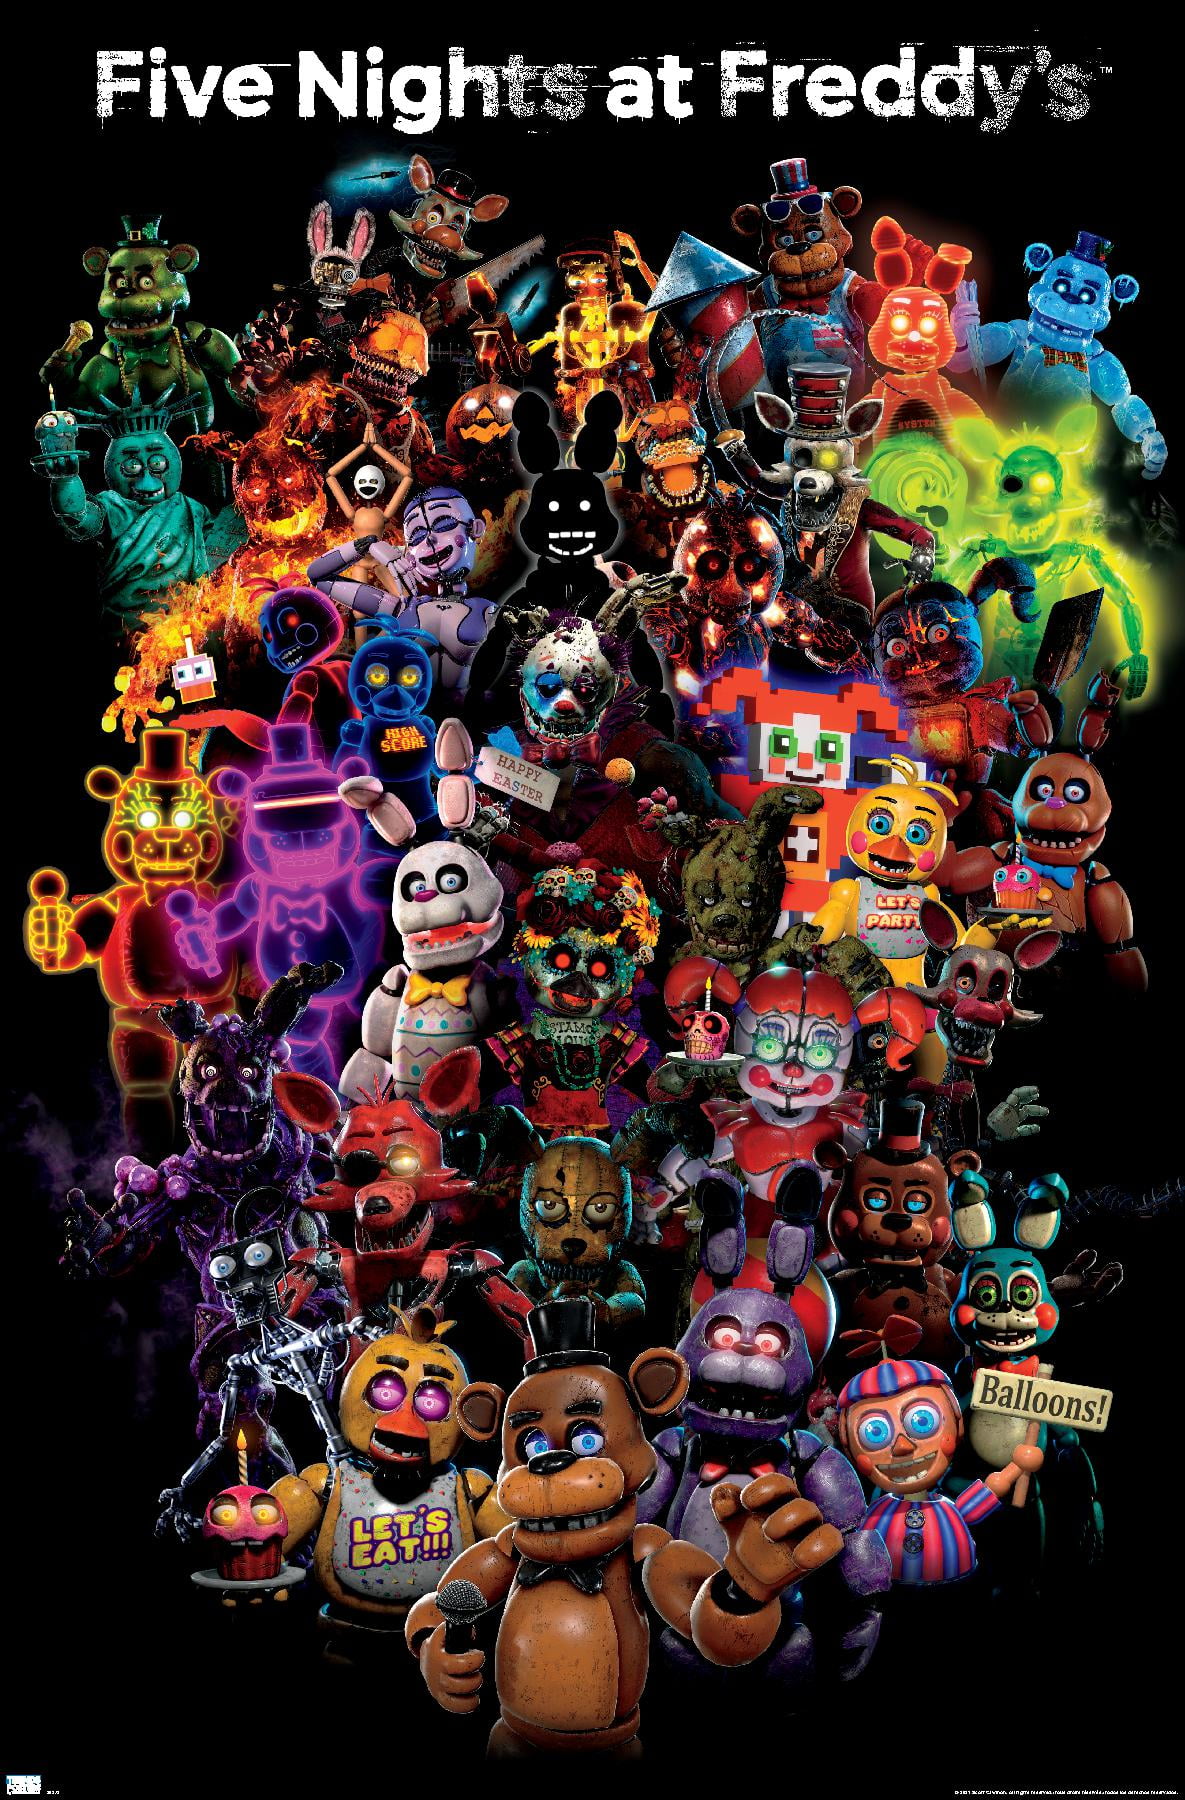 Trends International Five Nights at Freddy's Movie - Freddy One Sheet Wall  Poster, 22.37 x 34.00, Premium Unframed Version